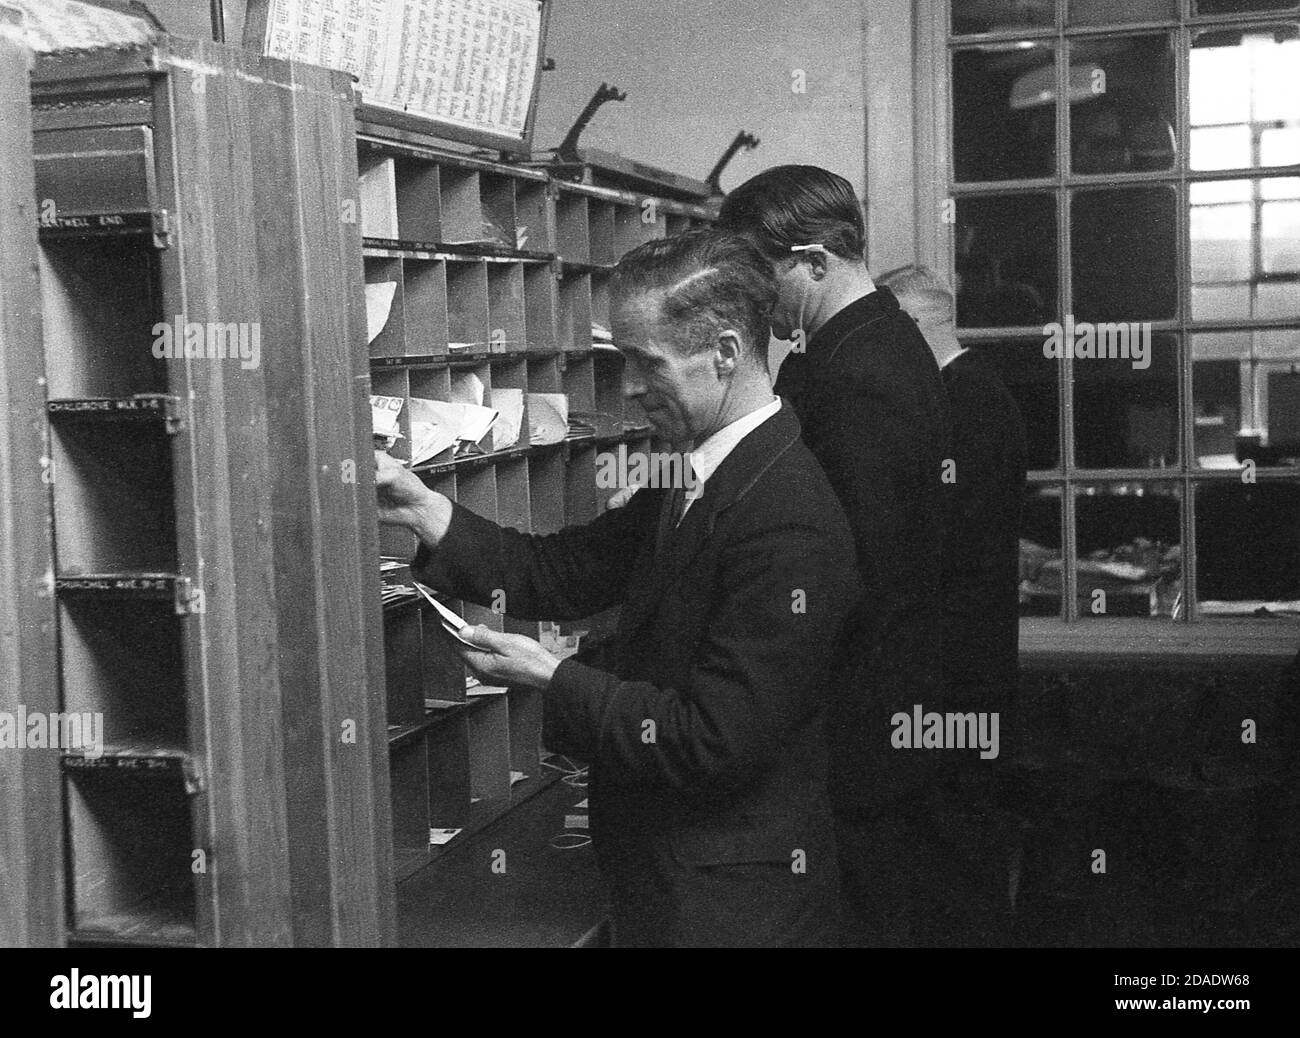 1950s, historical picture of GPO employees putting letters or mail into the individual cuppy holes on a sideboard, London, England, UK. As can be seen, in this era there was no mechanisation and all letters had to be sorted by hand and on a wall unit, the letters would be put into the correct little section or cubby hole based on areas or districts. Stock Photo